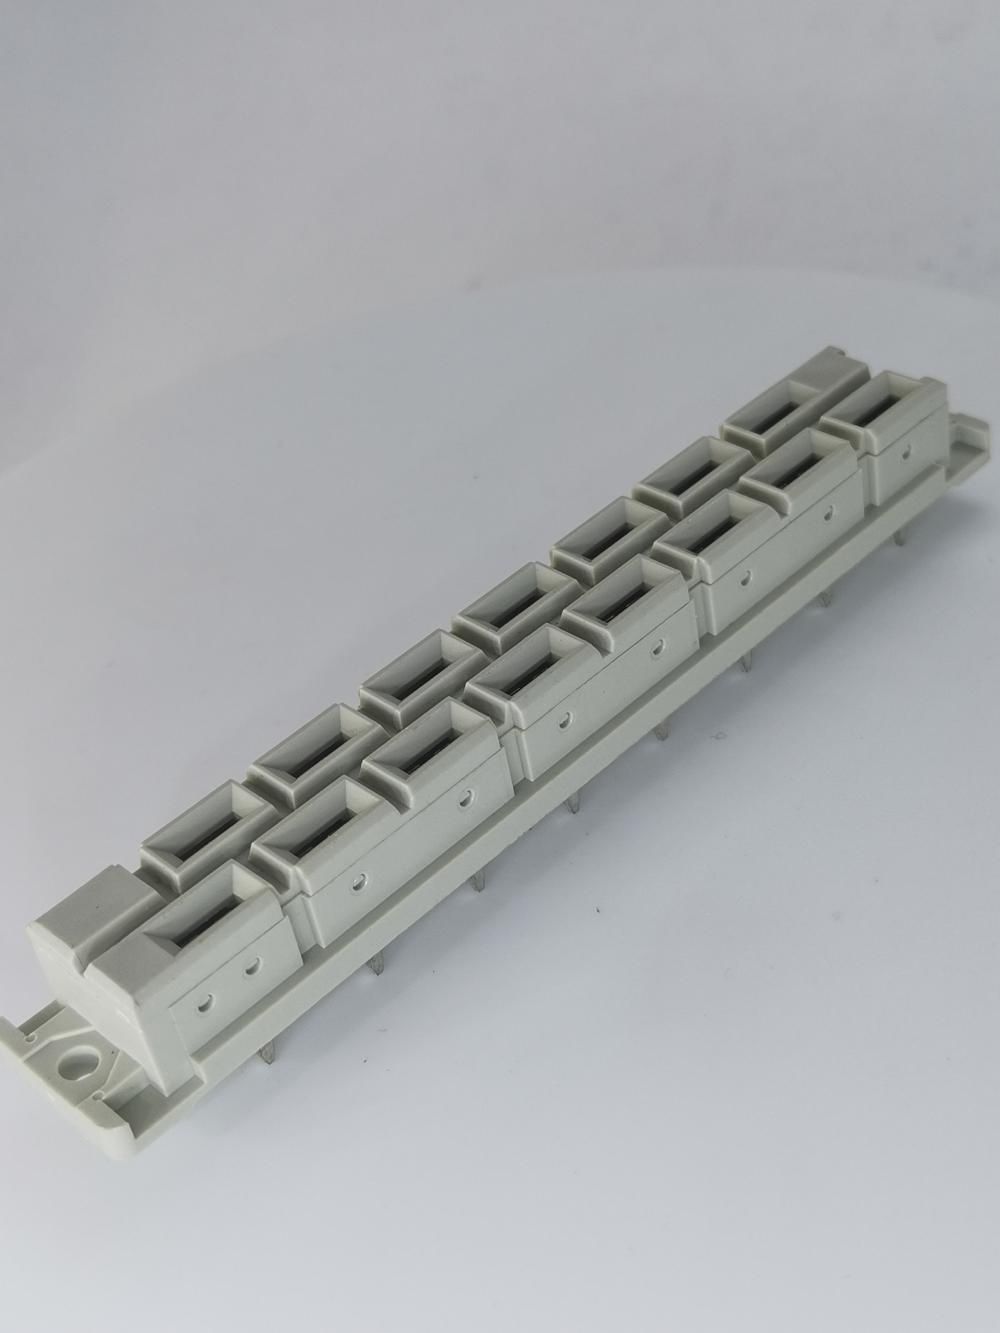 Vertical Female Type-H15 High Power DIN41612 Connectors